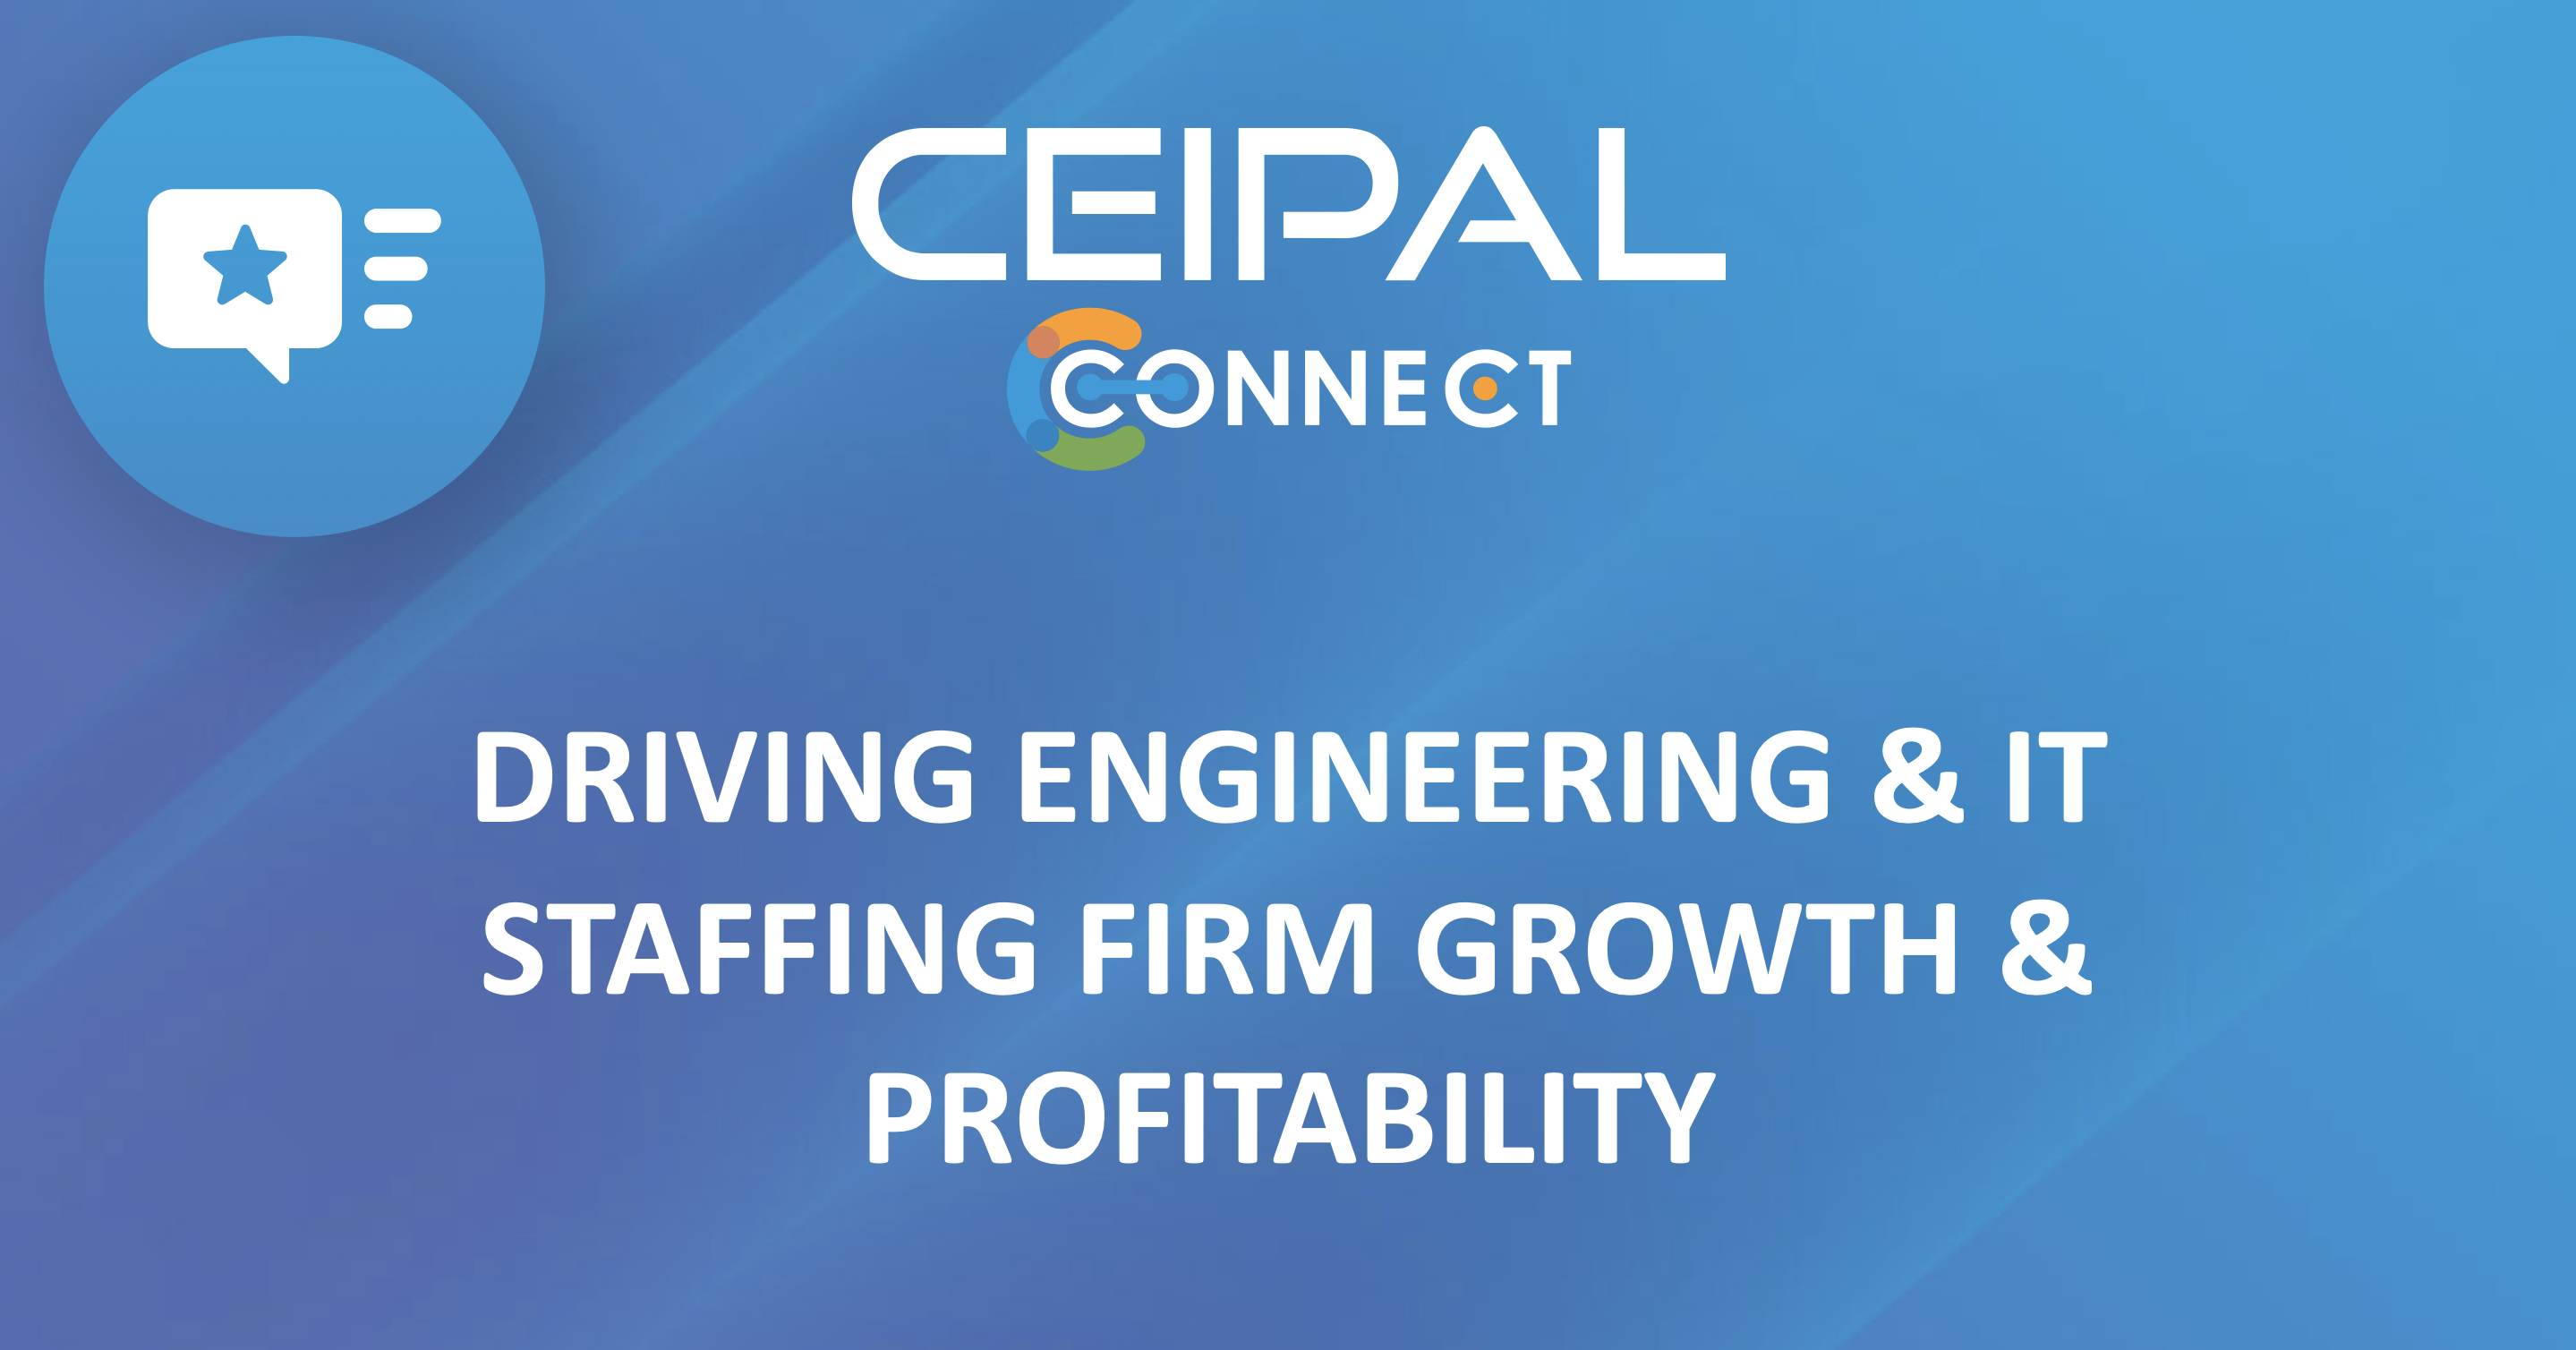 Driving Engineering & IT Staffing Firm Growth & Profitability